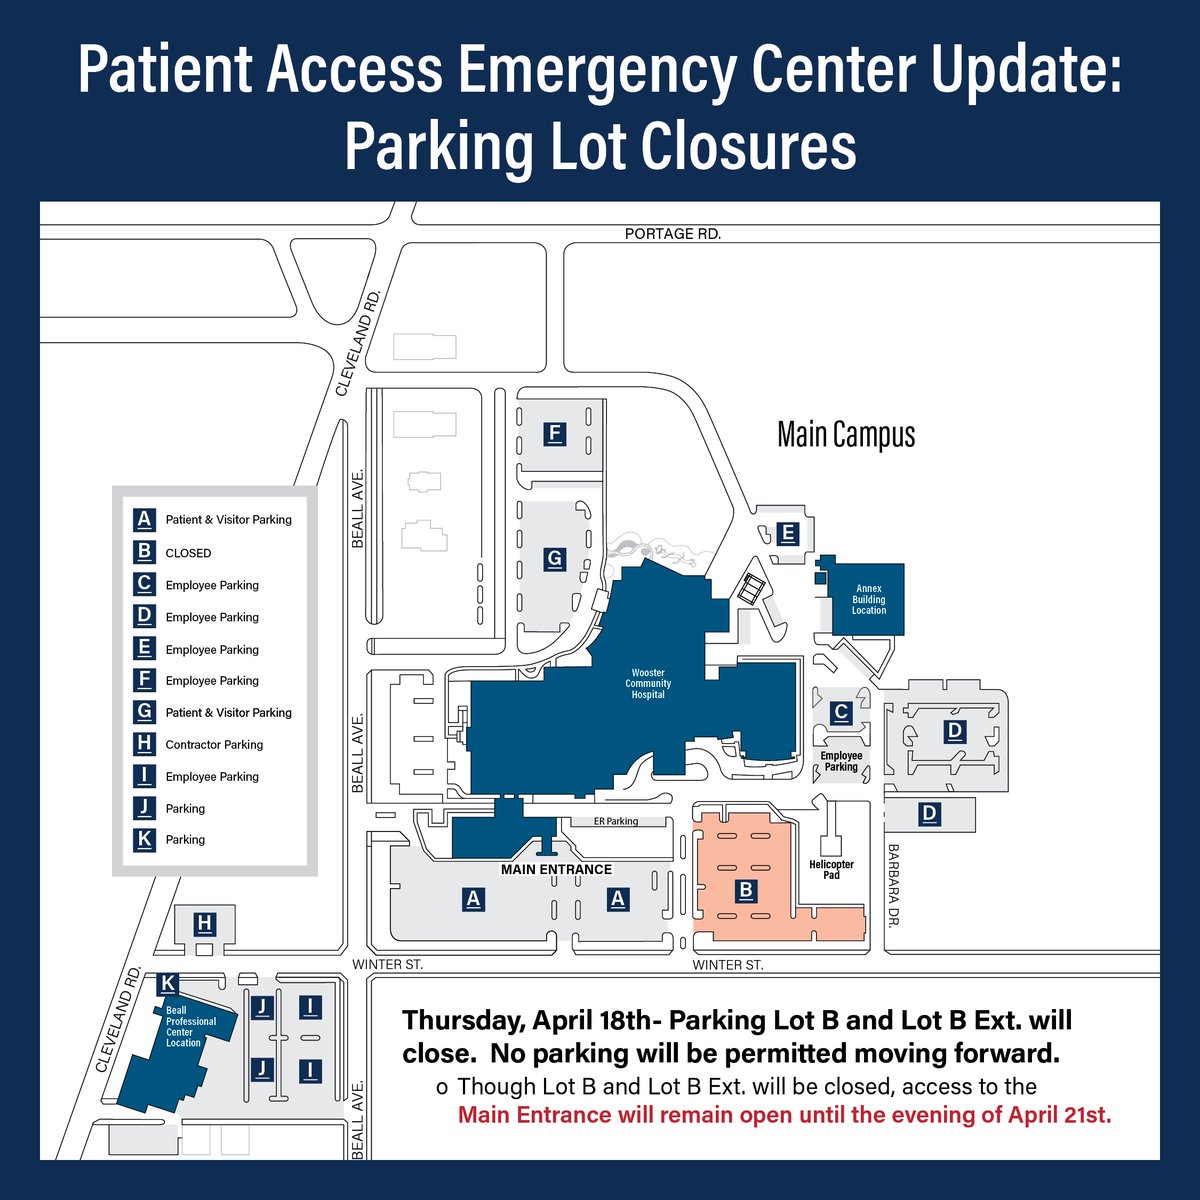 🚧 **Construction Update** 🚧 Starting TOMORROW, Parking Lot B & B Ext. at Wooster Community Hospital will close for construction. Main Entrance access remains open until April 21st. Your patience is appreciated! woosterhospital.org/patient-access…. #WCHCare #PAECProject